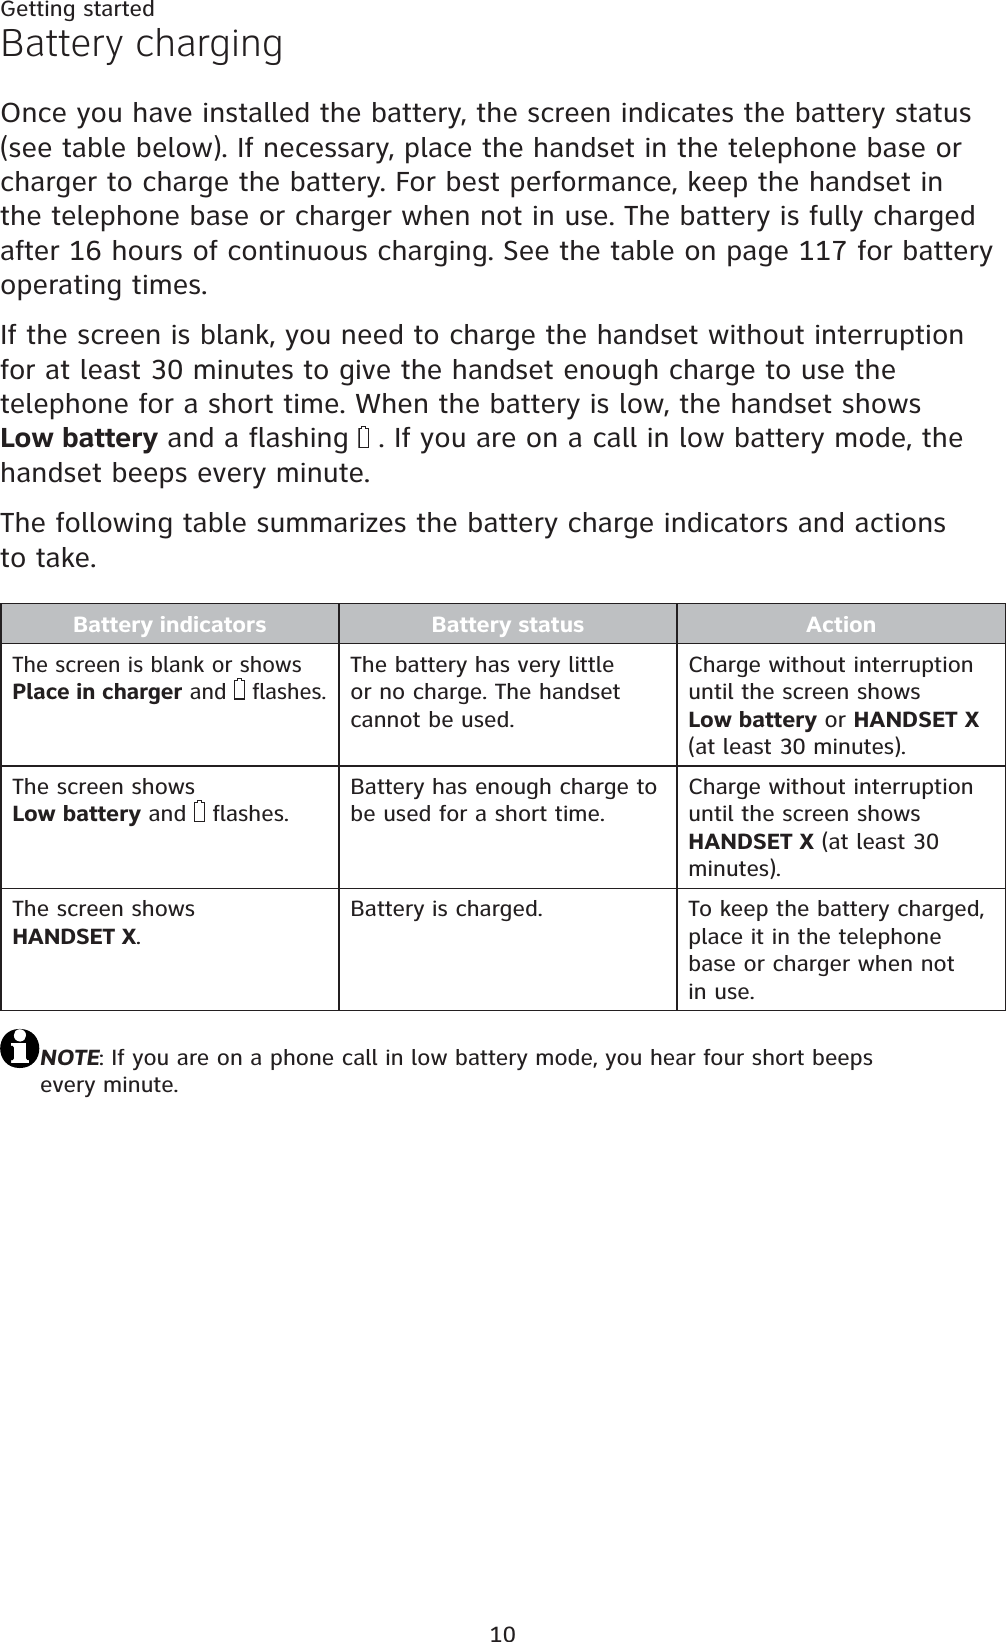 10Getting startedBattery chargingOnce you have installed the battery, the screen indicates the battery status (see table below). If necessary, place the handset in the telephone base or charger to charge the battery. For best performance, keep the handset in the telephone base or charger when not in use. The battery is fully charged after 16 hours of continuous charging. See the table on page 117 for battery operating times.If the screen is blank, you need to charge the handset without interruption for at least 30 minutes to give the handset enough charge to use the telephone for a short time. When the battery is low, the handset shows Low battery and a flashing  . If you are on a call in low battery mode, the handset beeps every minute.The following table summarizes the battery charge indicators and actionsto take.Battery indicators Battery status ActionThe screen is blank or shows Place in charger and   flashes.The battery has very little or no charge. The handset cannot be used.Charge without interruption until the screen shows Low battery or HANDSET X(at least 30 minutes).The screen shows Low battery and   flashes.Battery has enough charge to be used for a short time.Charge without interruption until the screen shows HANDSET X (at least 30 minutes).The screen shows HANDSET X.Battery is charged. To keep the battery charged, place it in the telephone base or charger when not in use.NOTE: If you are on a phone call in low battery mode, you hear four short beeps every minute.